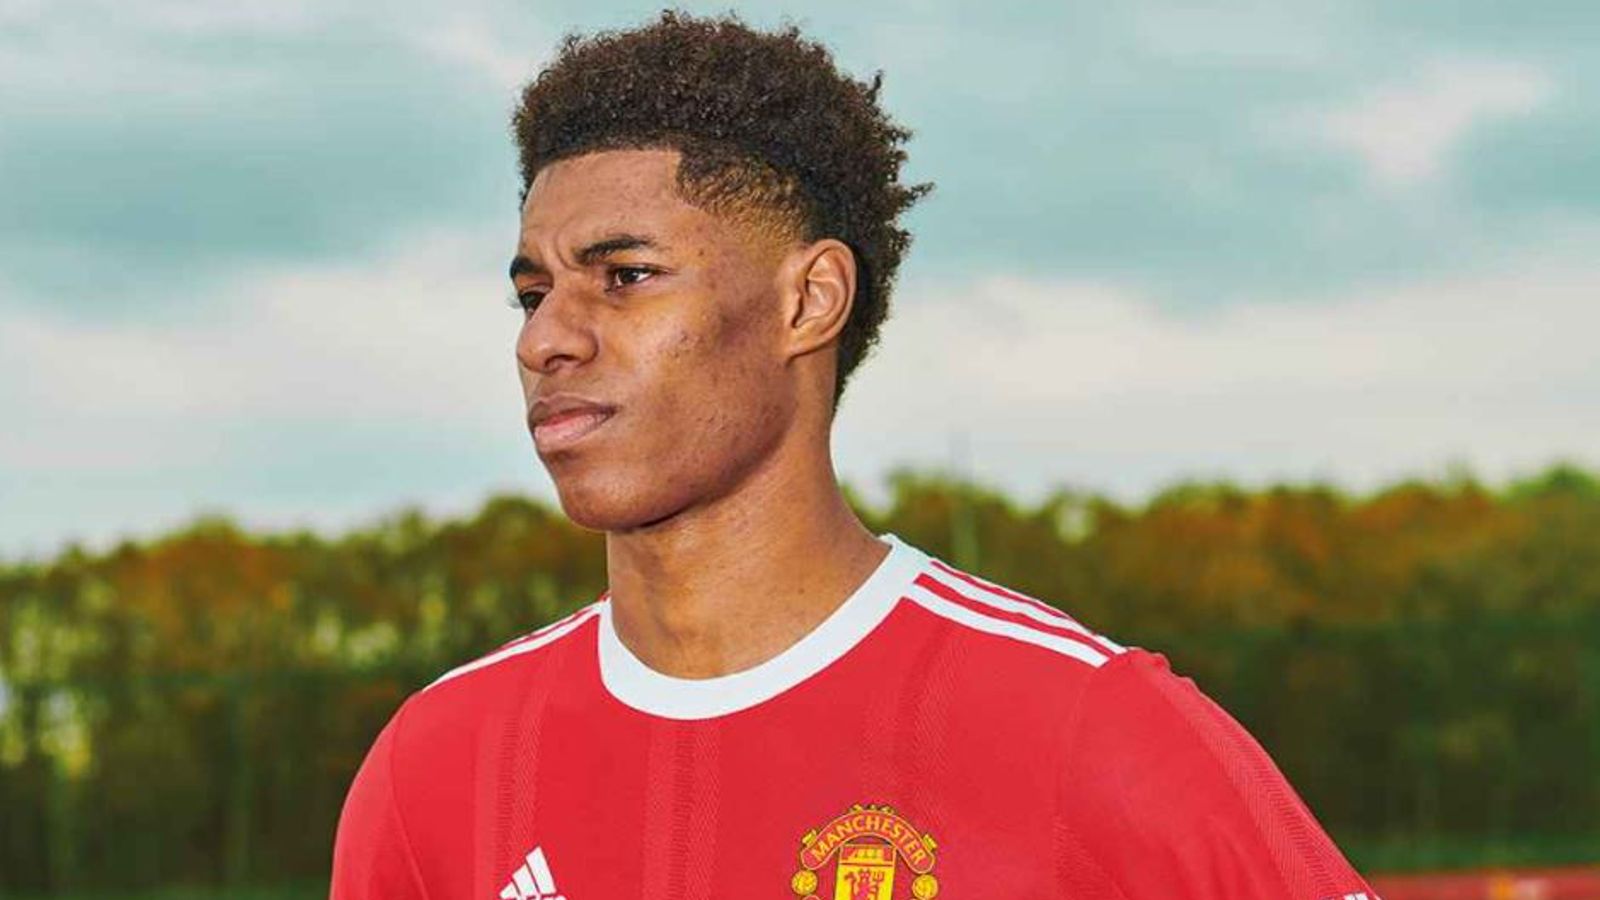 Marcus Rashford: Man Utd forward insists he won’t ‘stick to football’ after demanding action to end child hunger